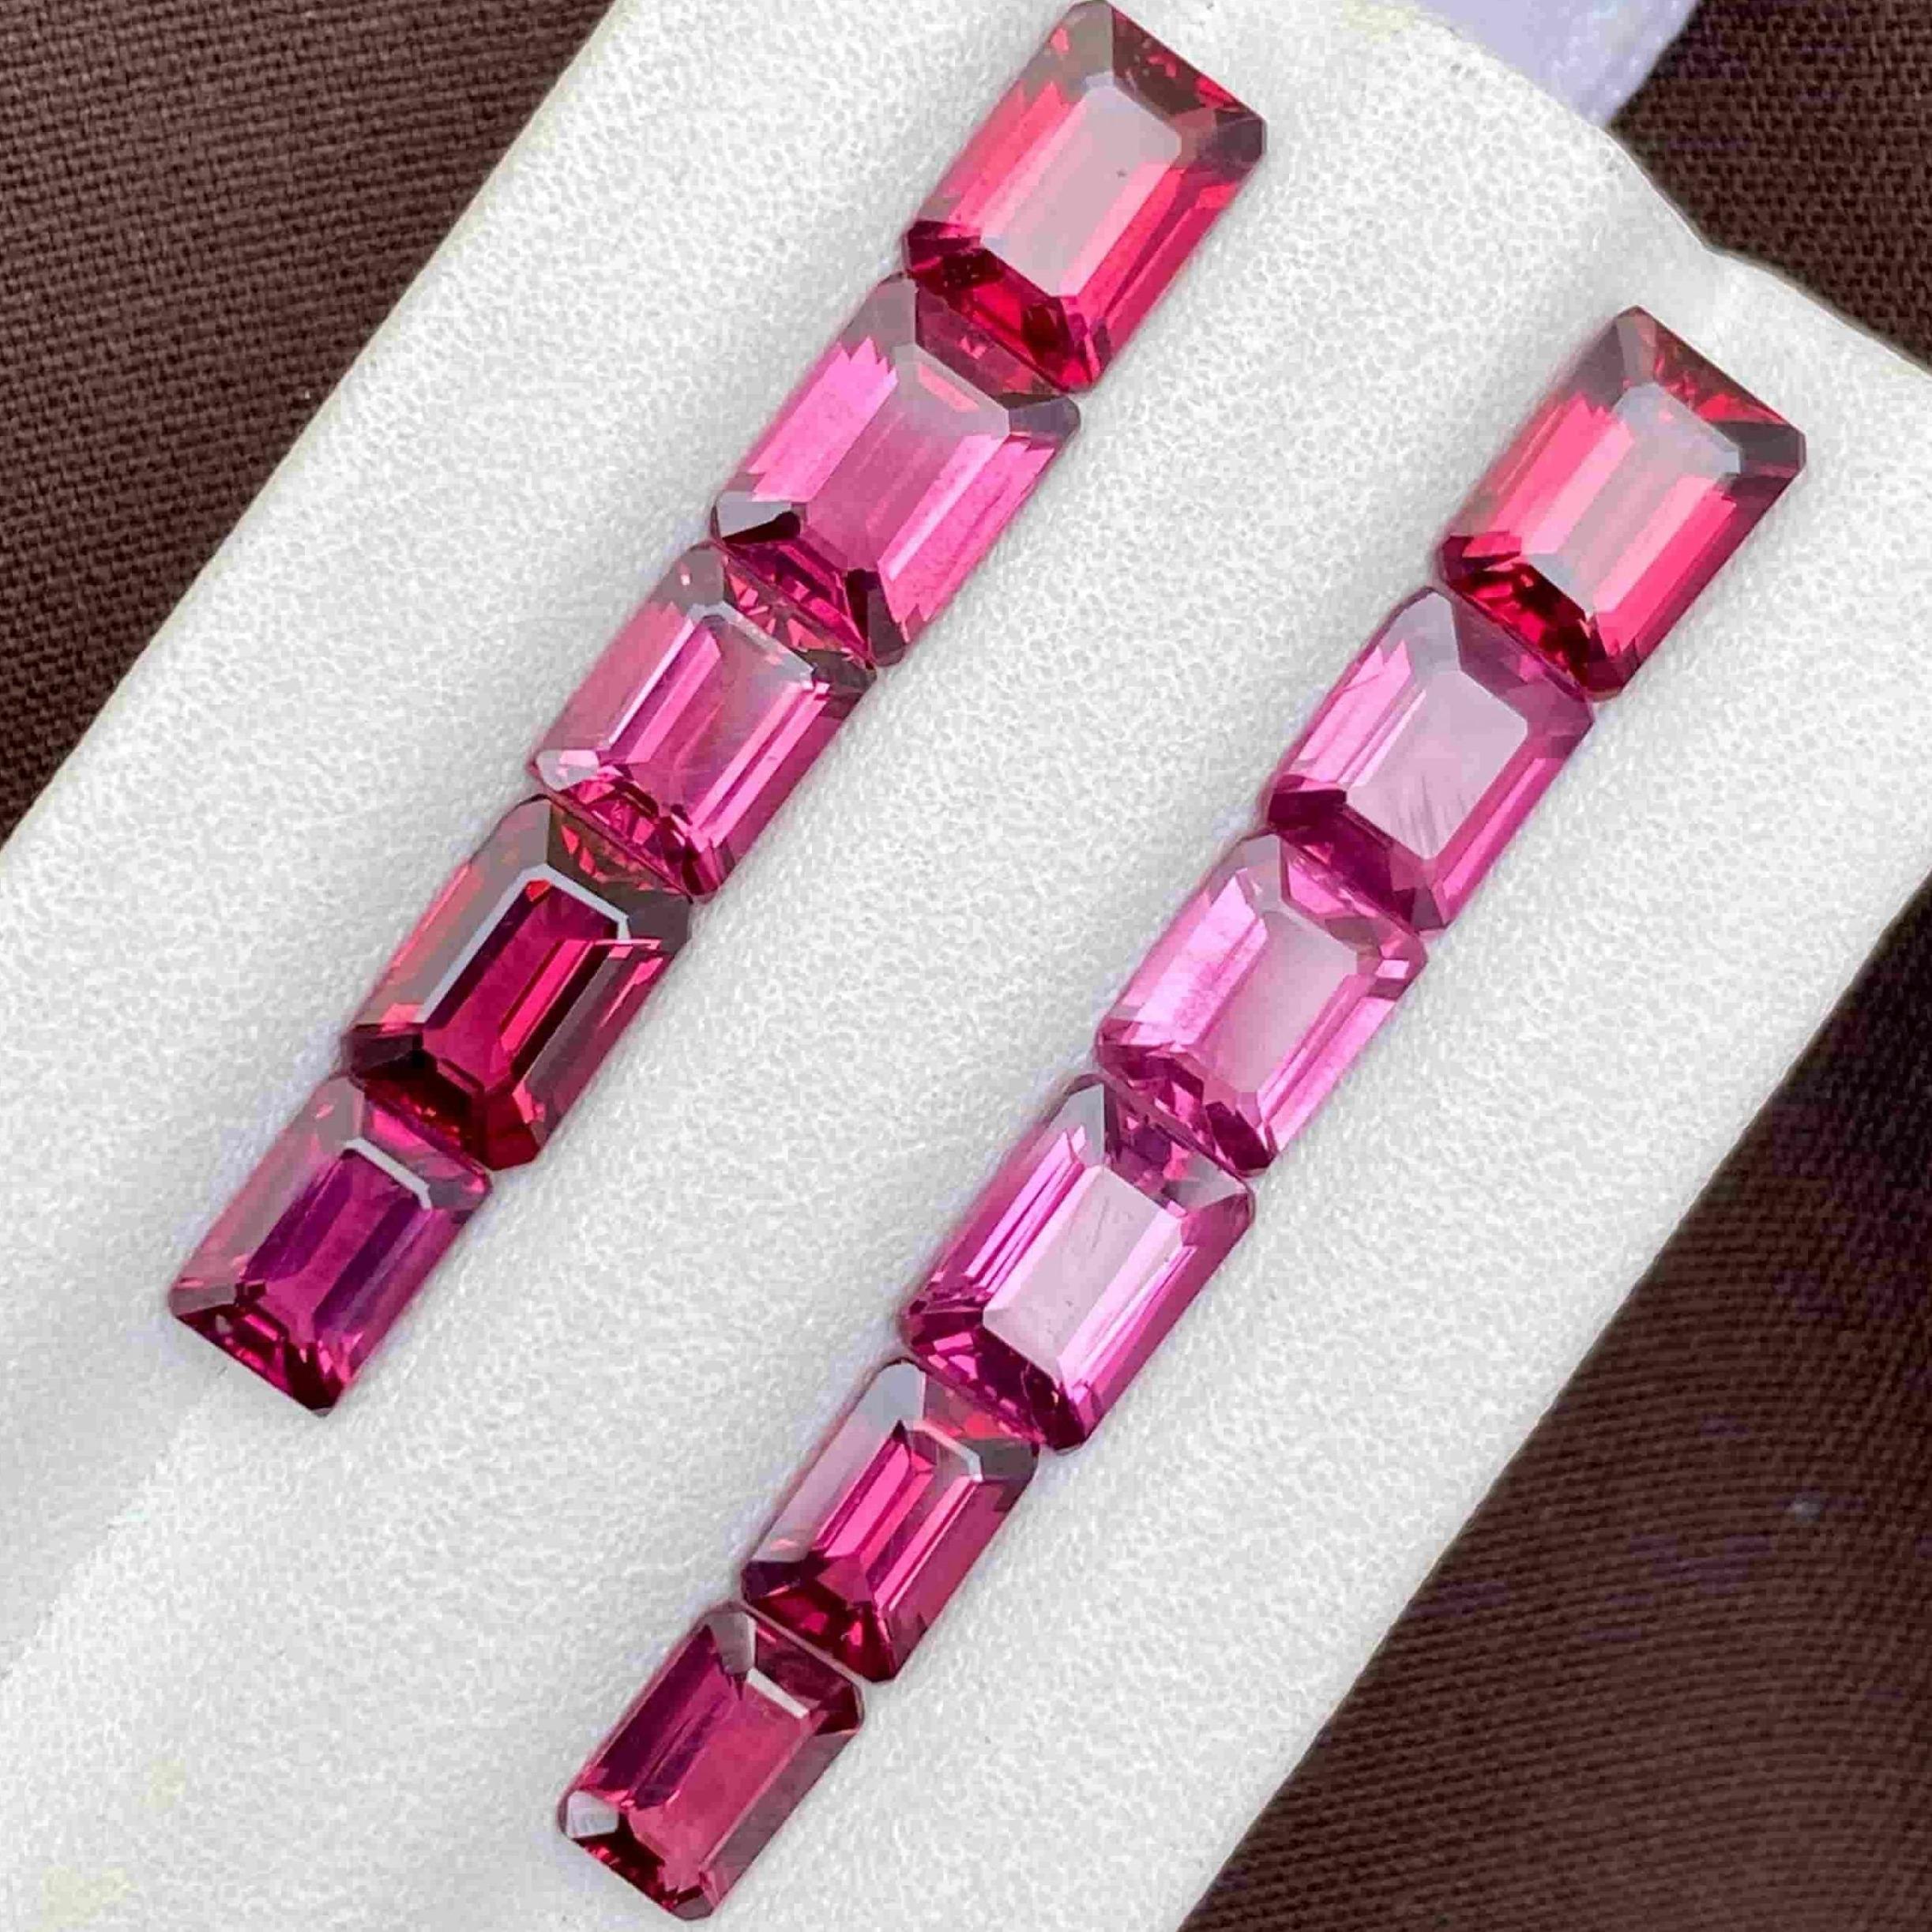 Gemstone Type Pink Rhodolite Garnet Lot
Weight 11.40 carats
Weight 1.25 carats
Clarity SI to Eye Clean
Origin Africa
Treatment None




Indulge in the enchanting allure of this Pink Rhodolite Garnet lot, a captivating collection of natural gemstones